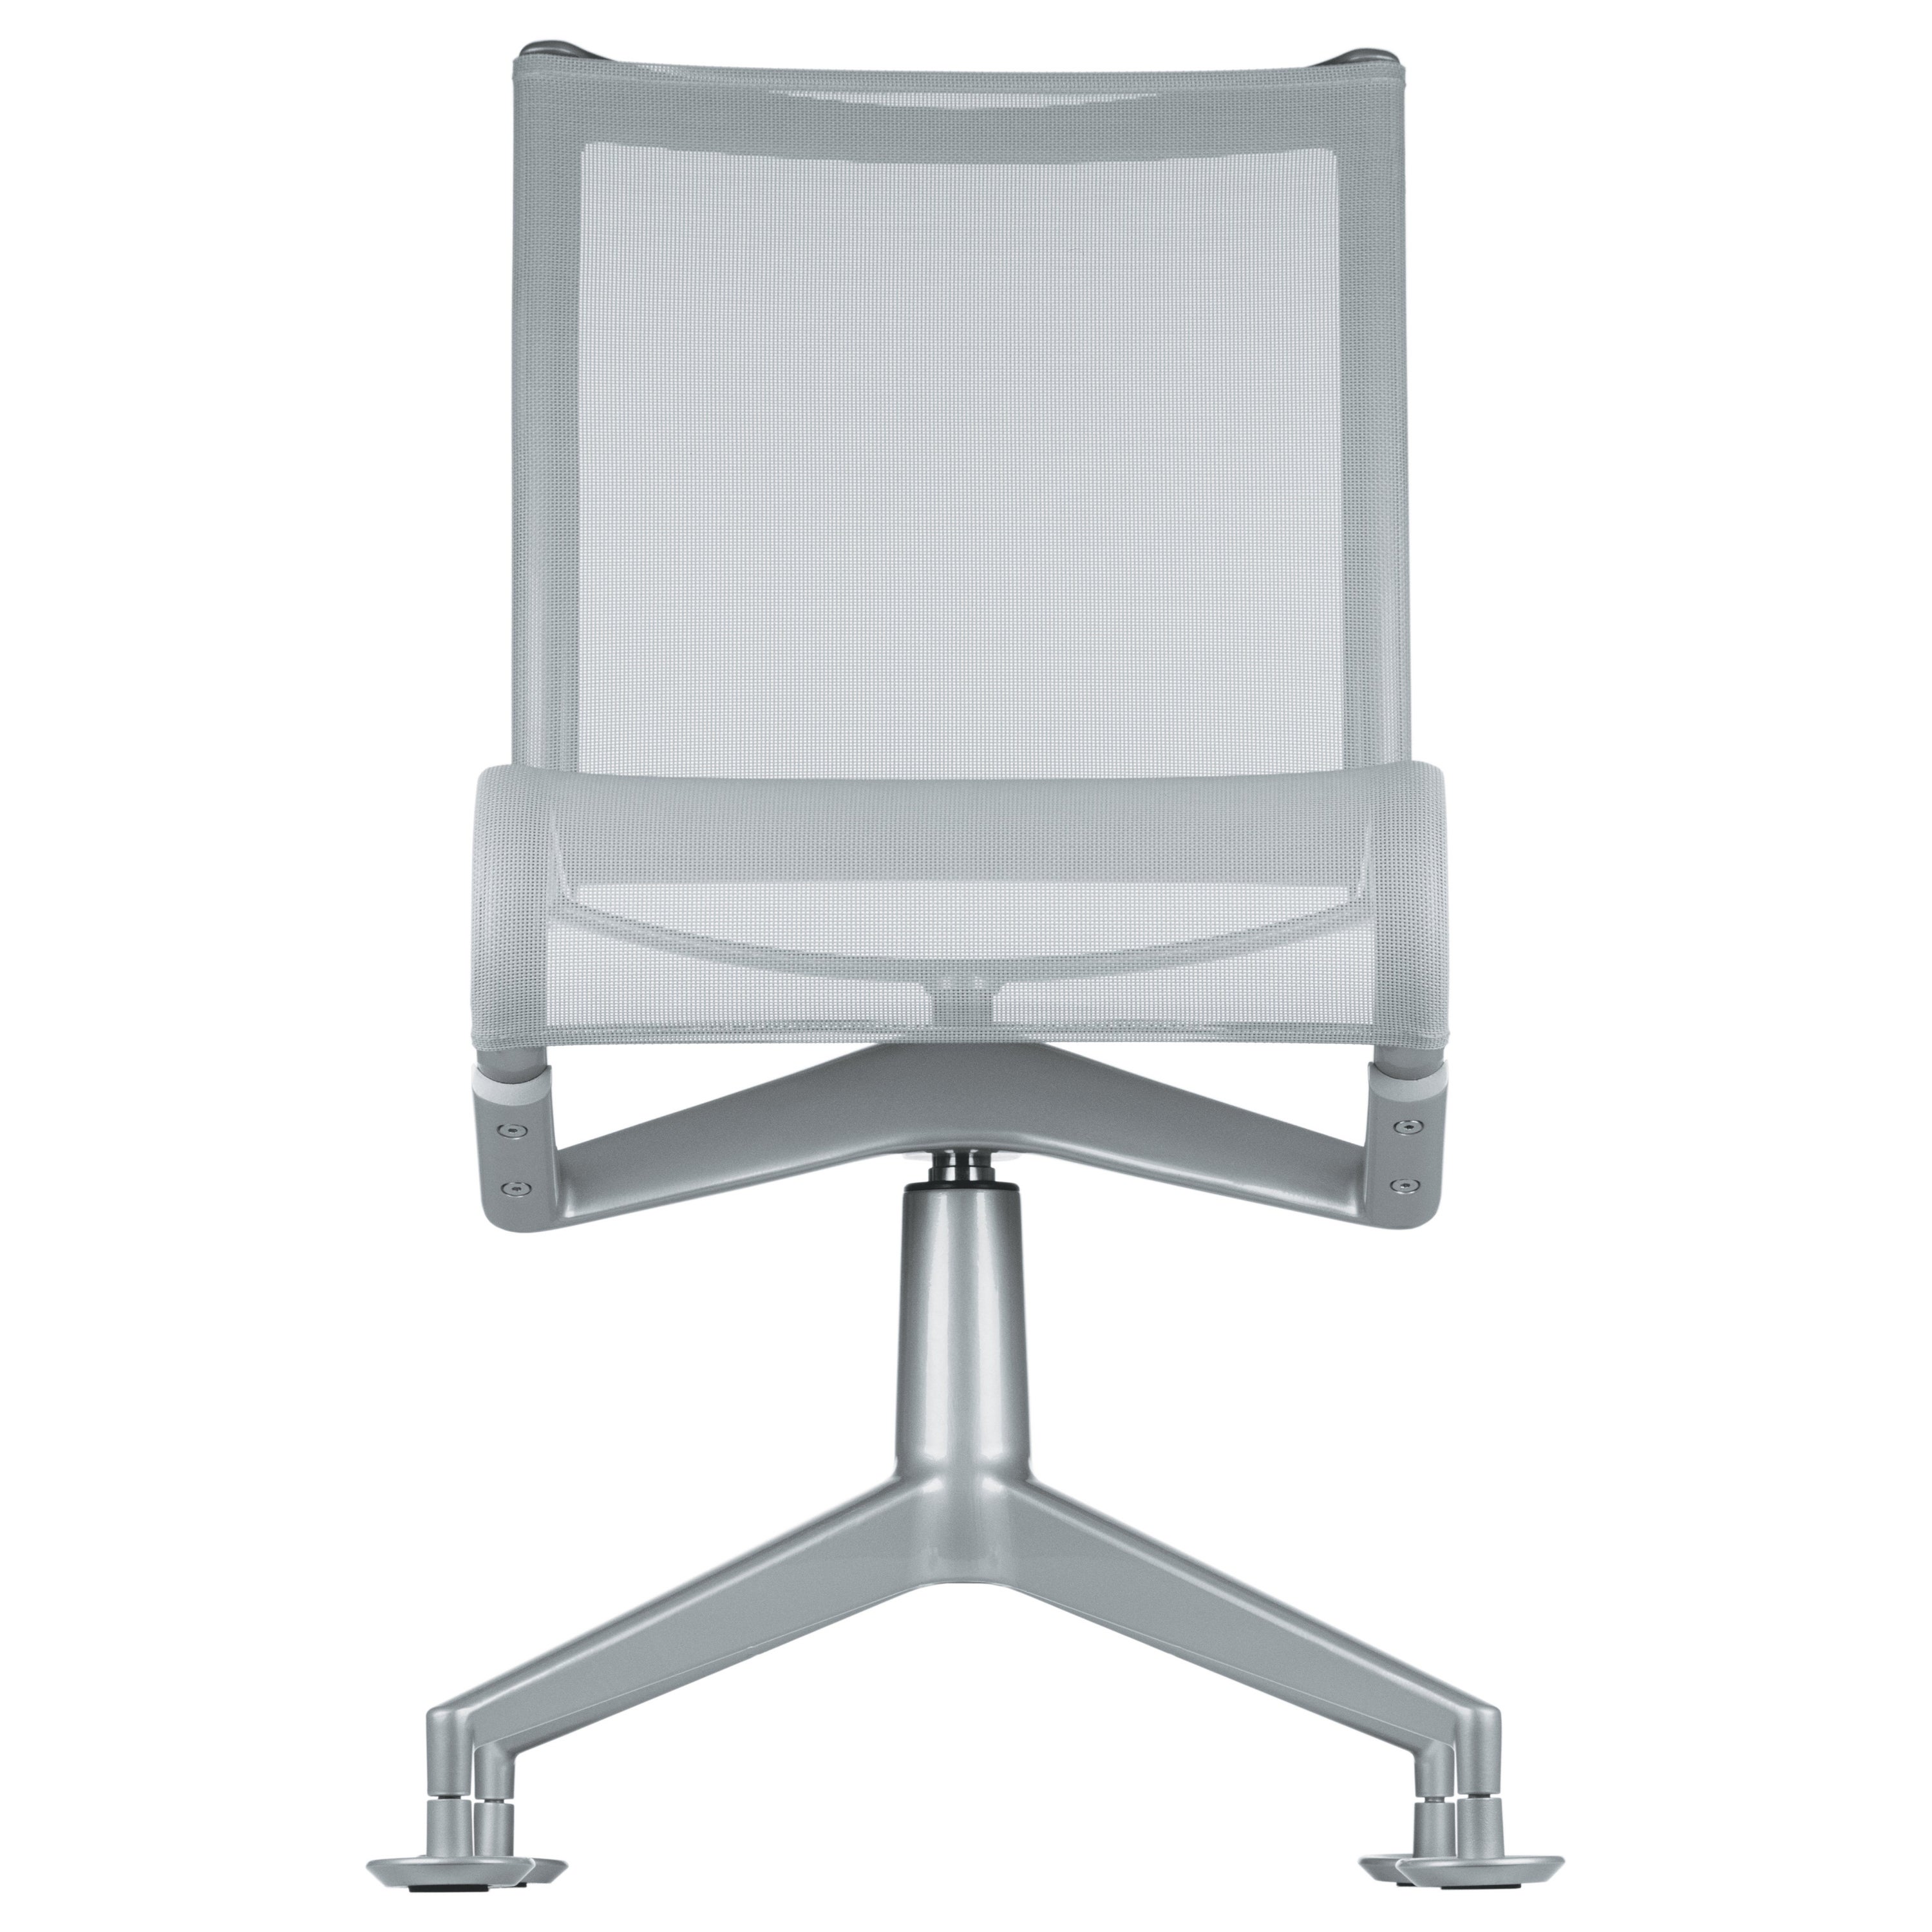 Alias 436 Meetingframe 44 Chair in Light Grey Mesh with Lacquered Aluminum Frame